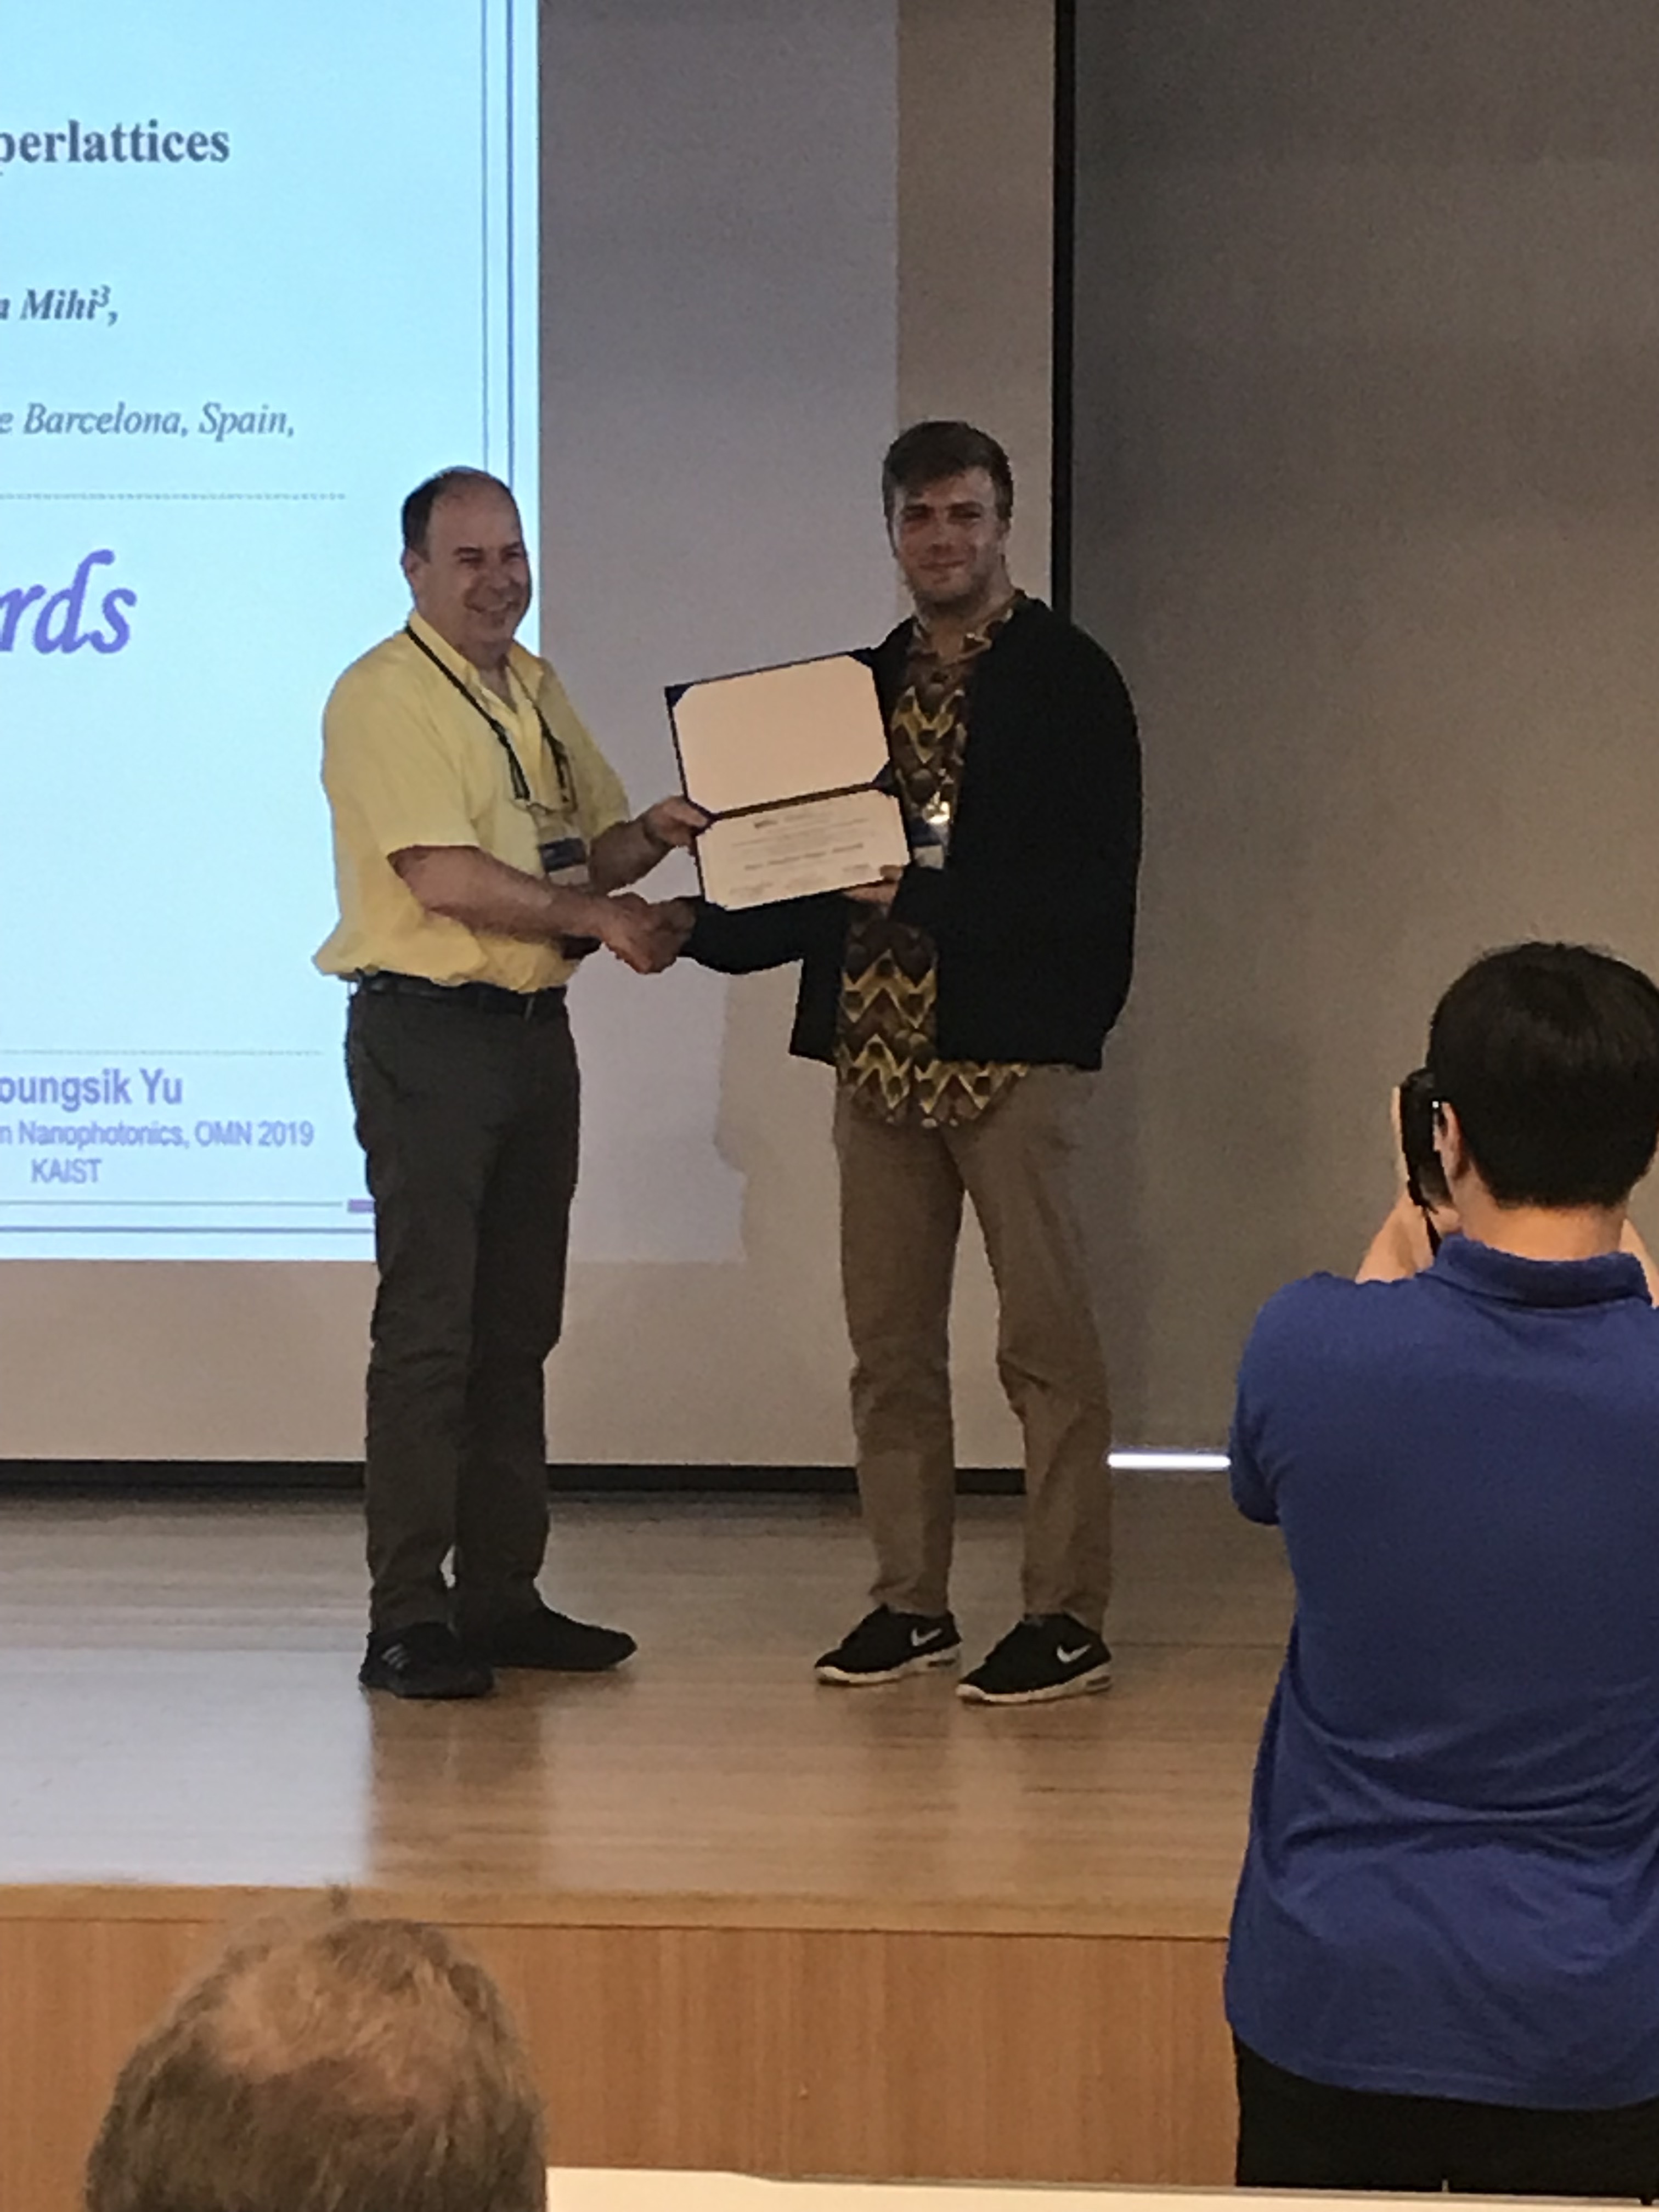 Best Paper Award for Mathias Charconnet on the International Conference on Optical MEMS and Nanophotonics, IEEE OMN 2019, in Daejeon, Korea, 28 July - 1 August